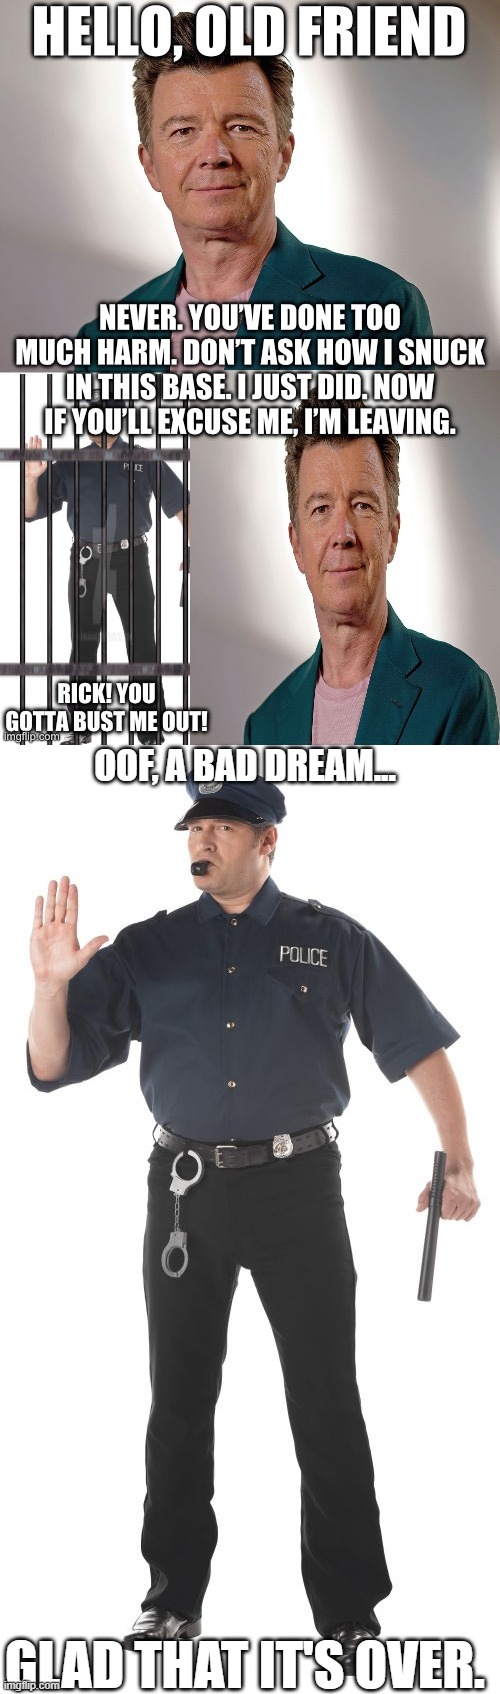 OOF, A BAD DREAM... GLAD THAT IT'S OVER. | image tagged in memes,stop cop | made w/ Imgflip meme maker